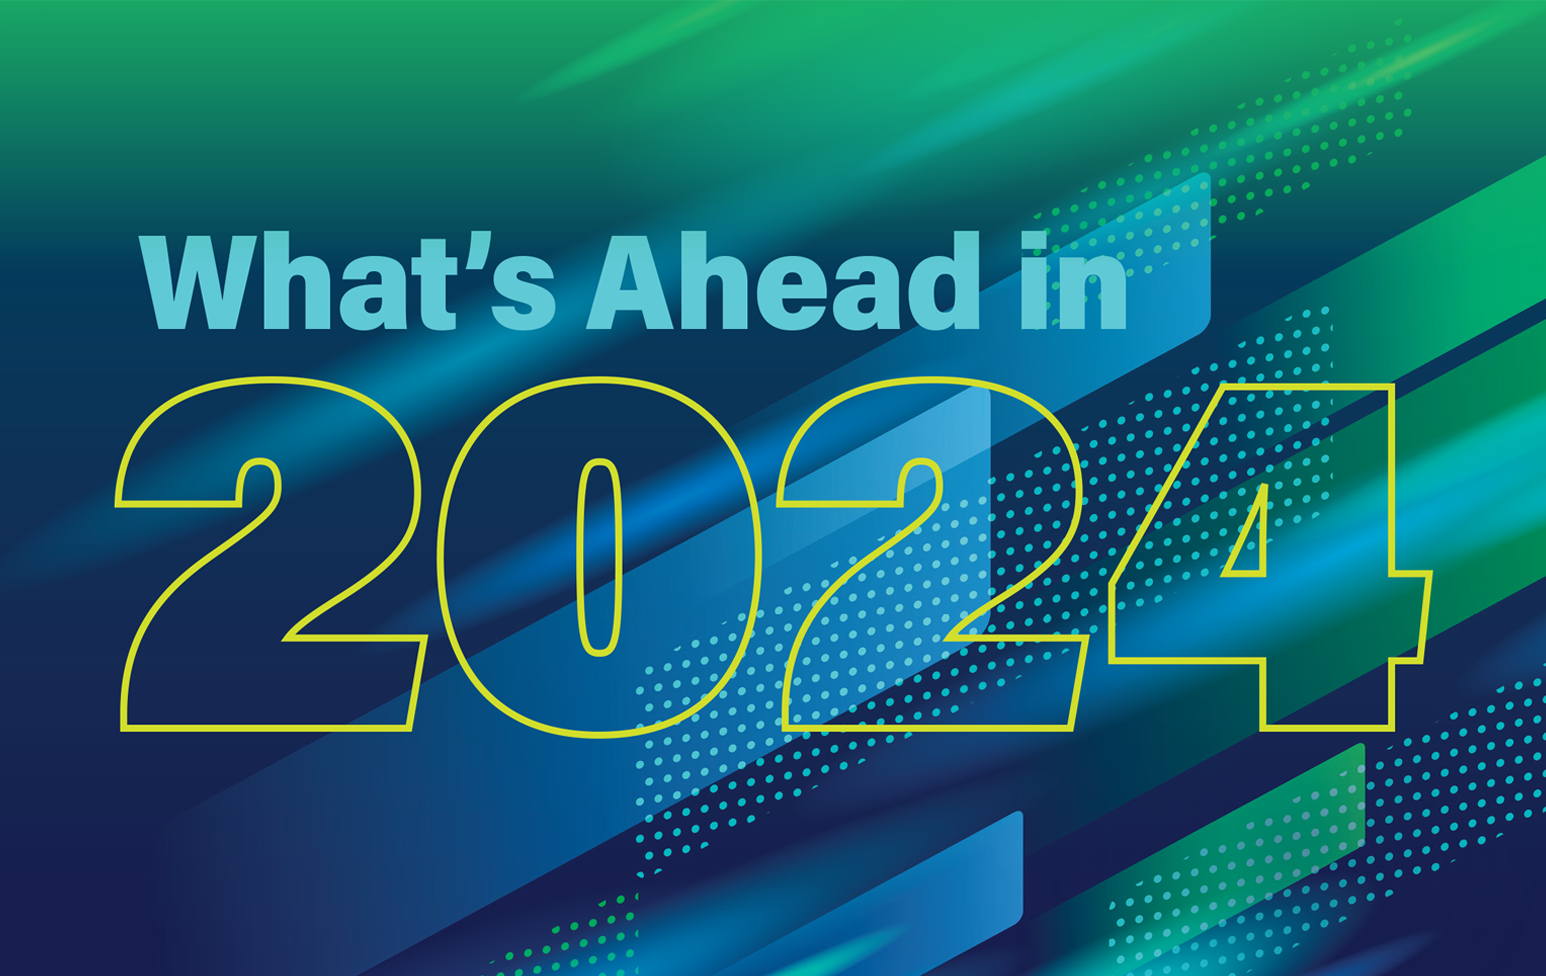 What's Ahead in 2024 | Image Credit: © Dimakostrov - stock.adobe.com